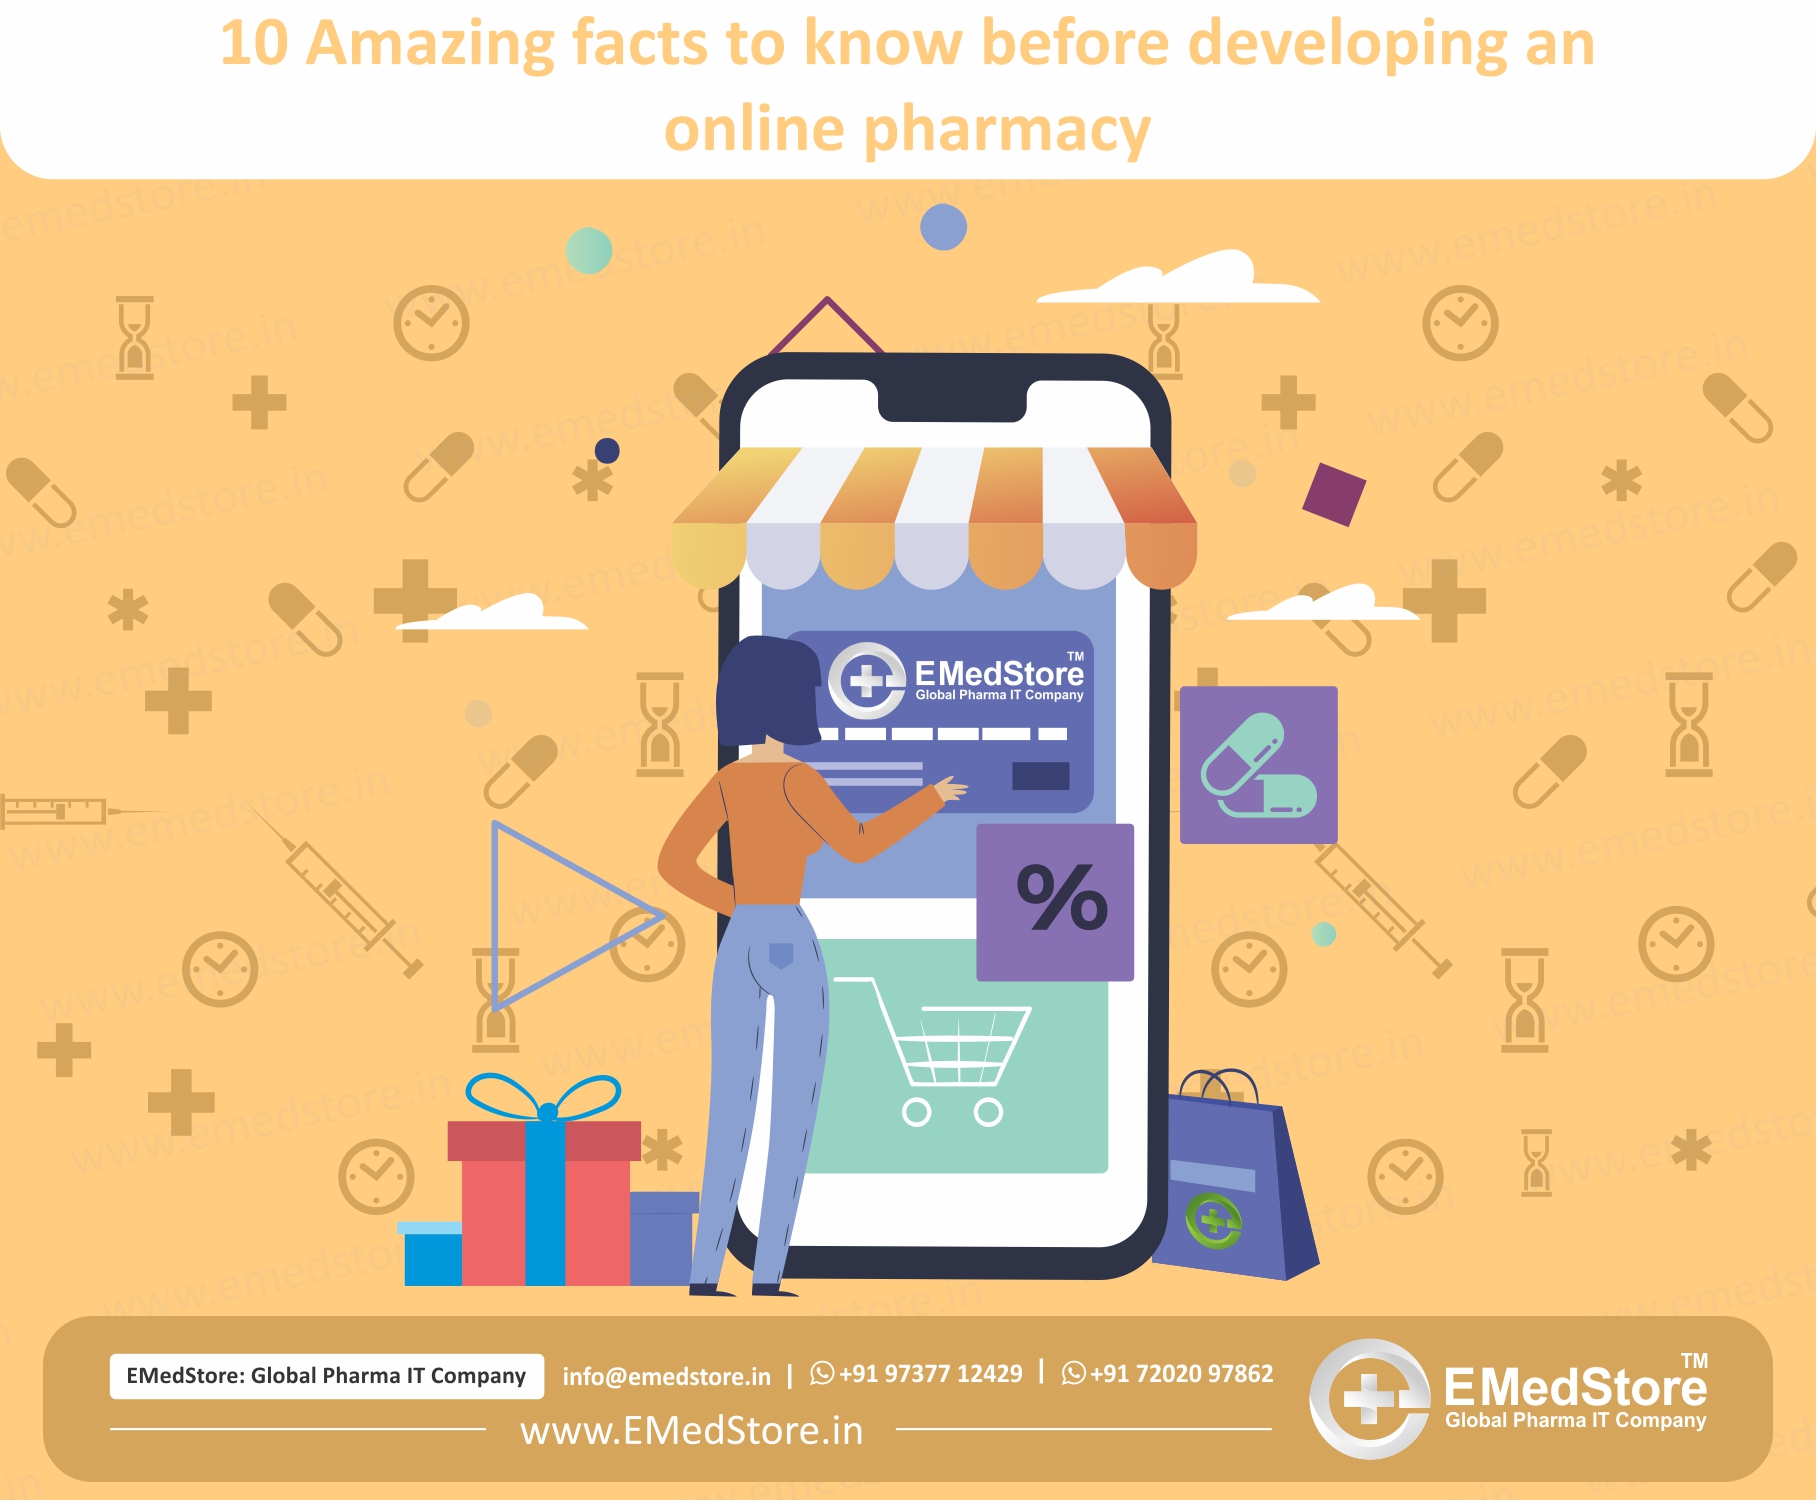 10 Amazing facts to know before developing an online pharmacy | EMedStore Blog